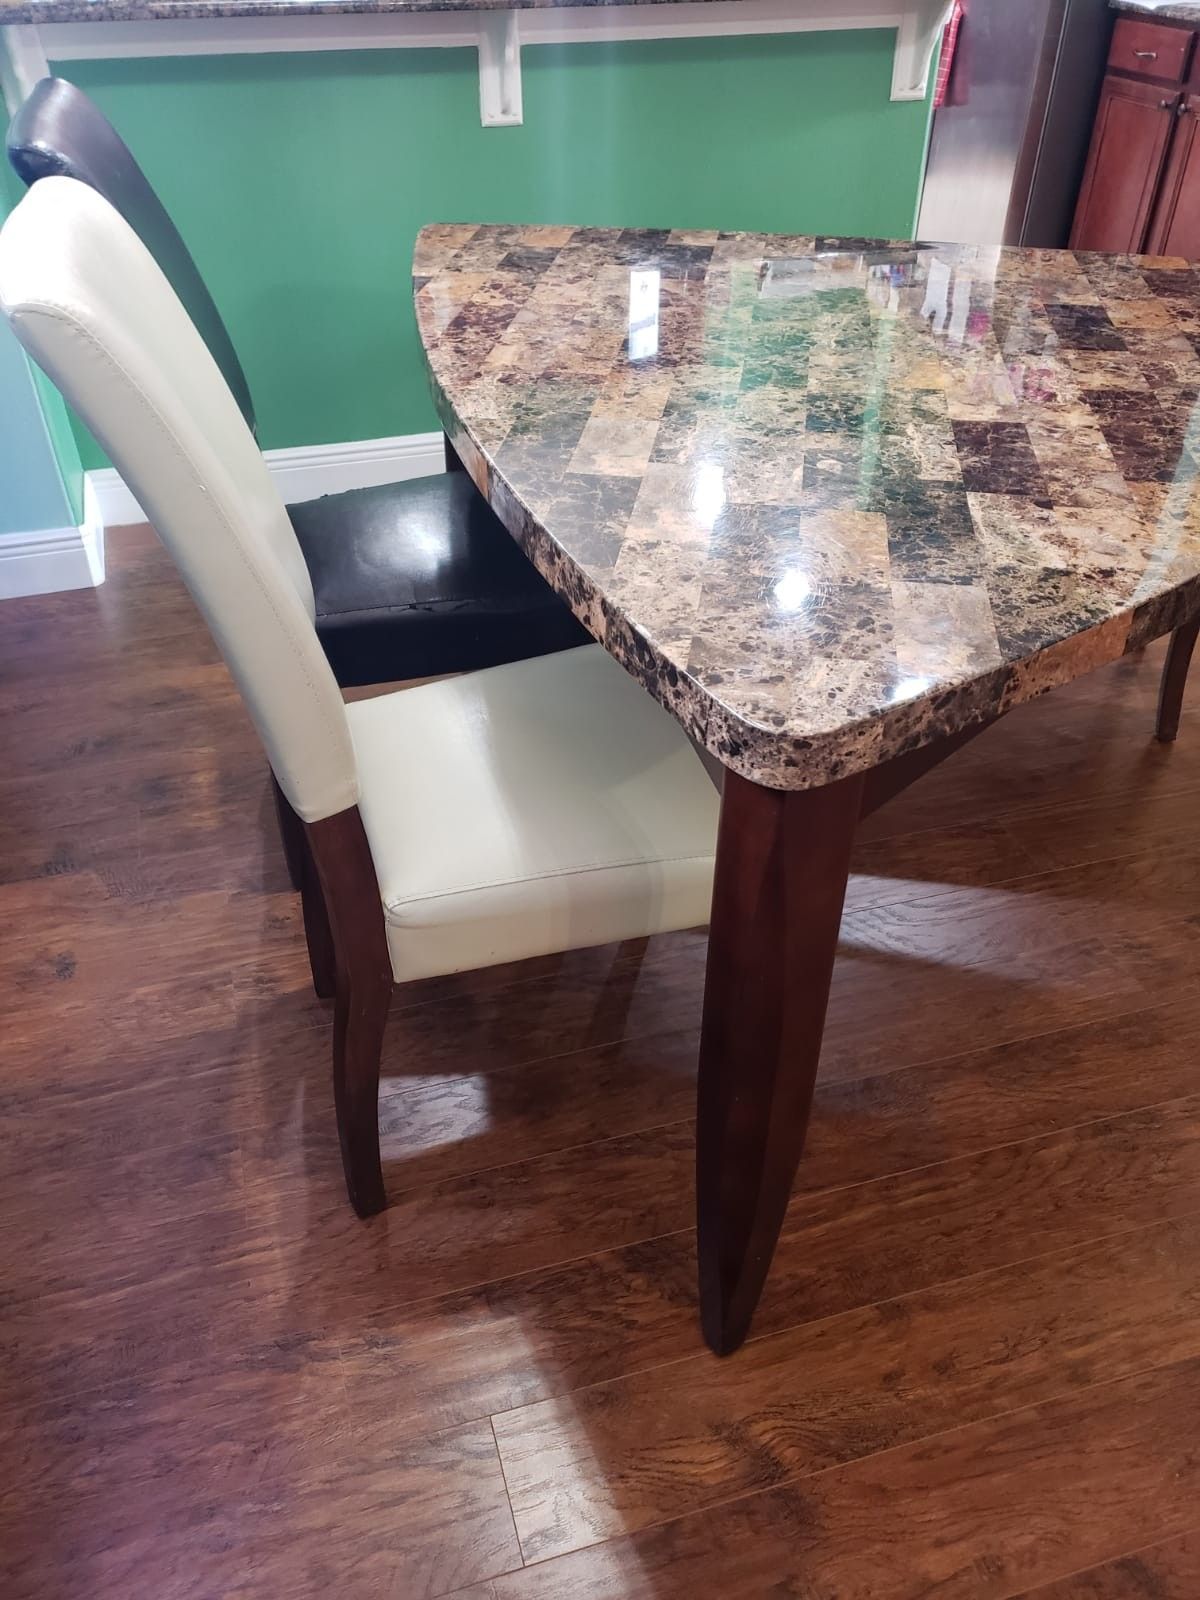 Eat in kitchen table and chair set (used but in good condition)